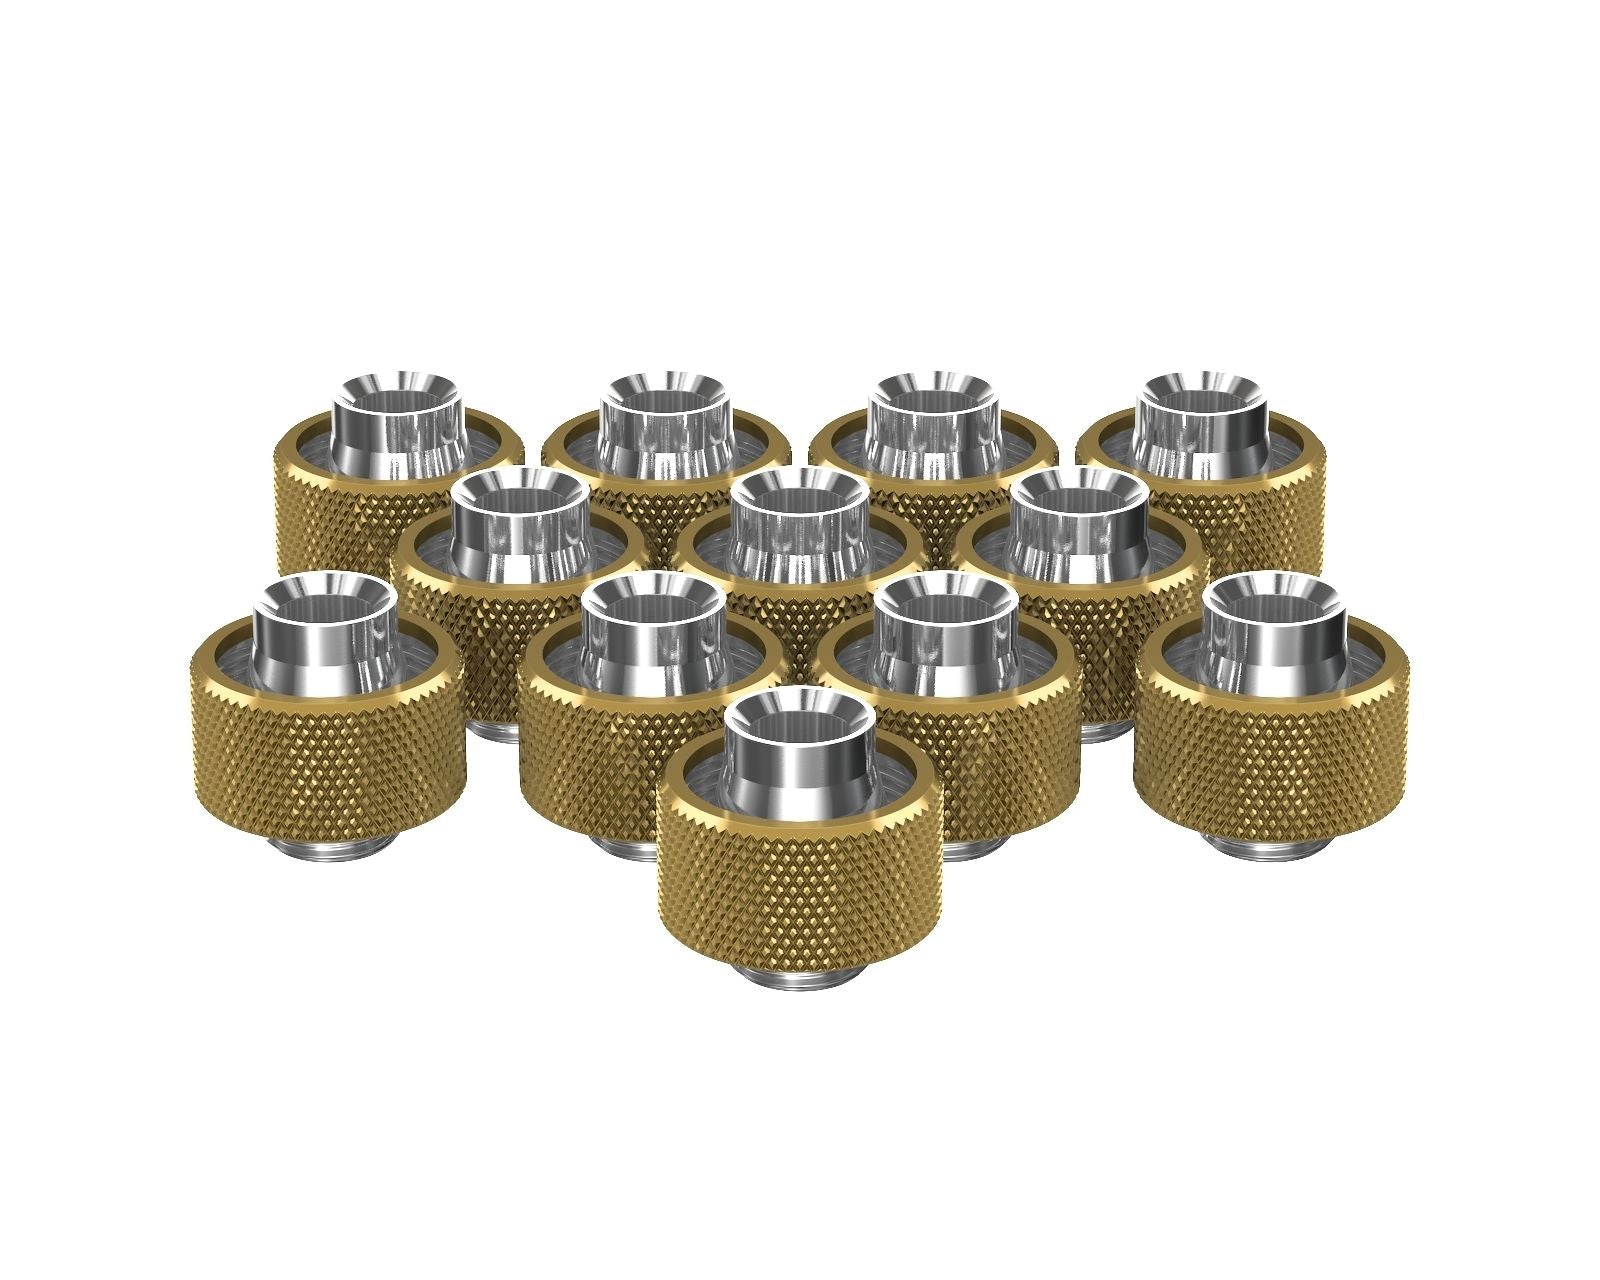 PrimoChill SecureFit SX - Premium Compression Fittings 12 Pack - For 1/2in ID x 3/4in OD Flexible Tubing (F-SFSX34-12) - Available in 20+ Colors, Custom Watercooling Loop Ready - Candy Gold